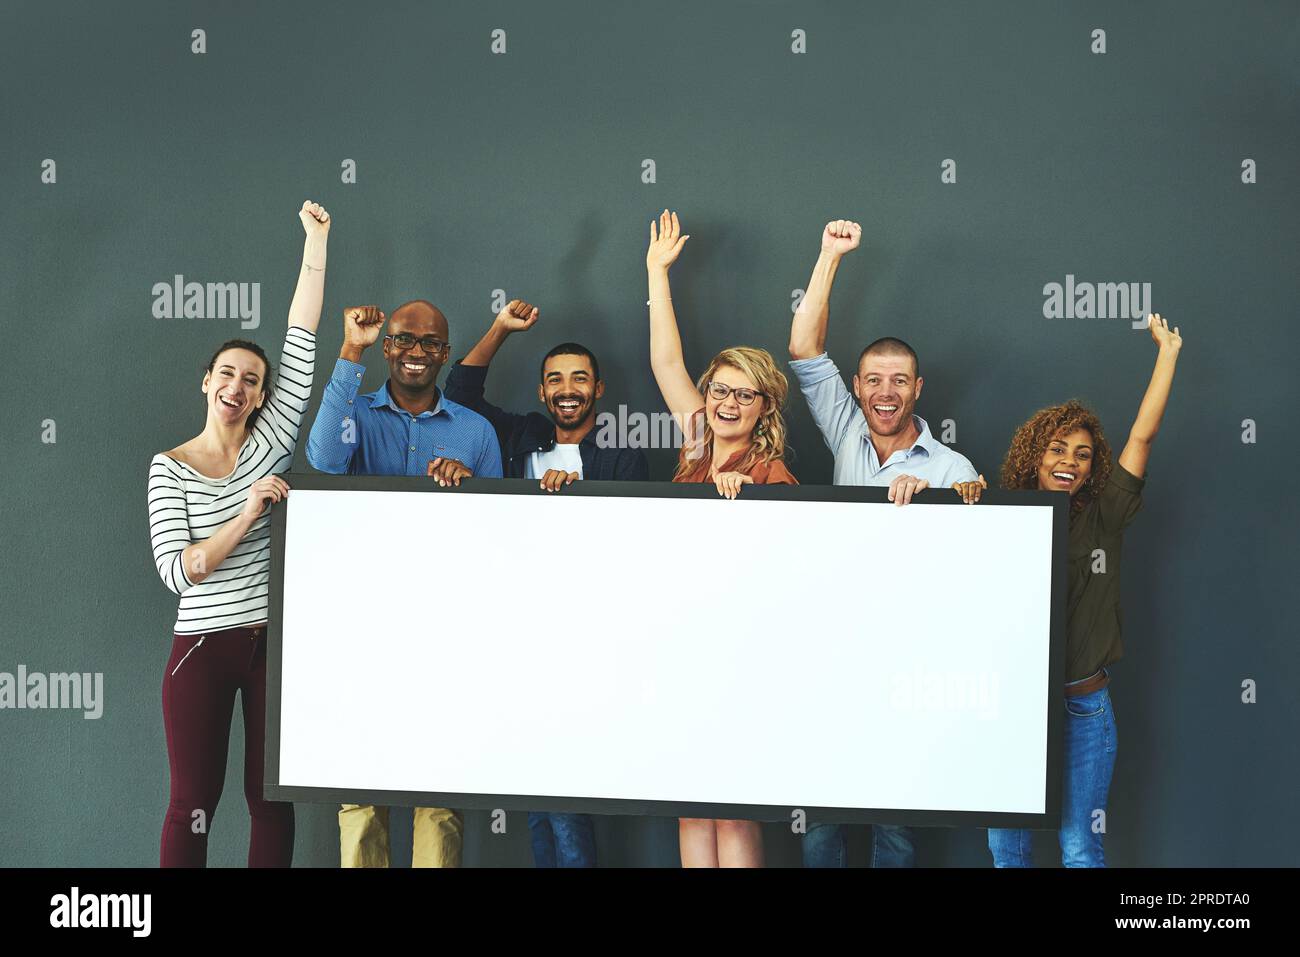 Happy, diverse and cheering marketing team with a blank card, poster or billboard with copyspace in studio on a grey background. A group of smiling business people celebrating and endorsing a product Stock Photo